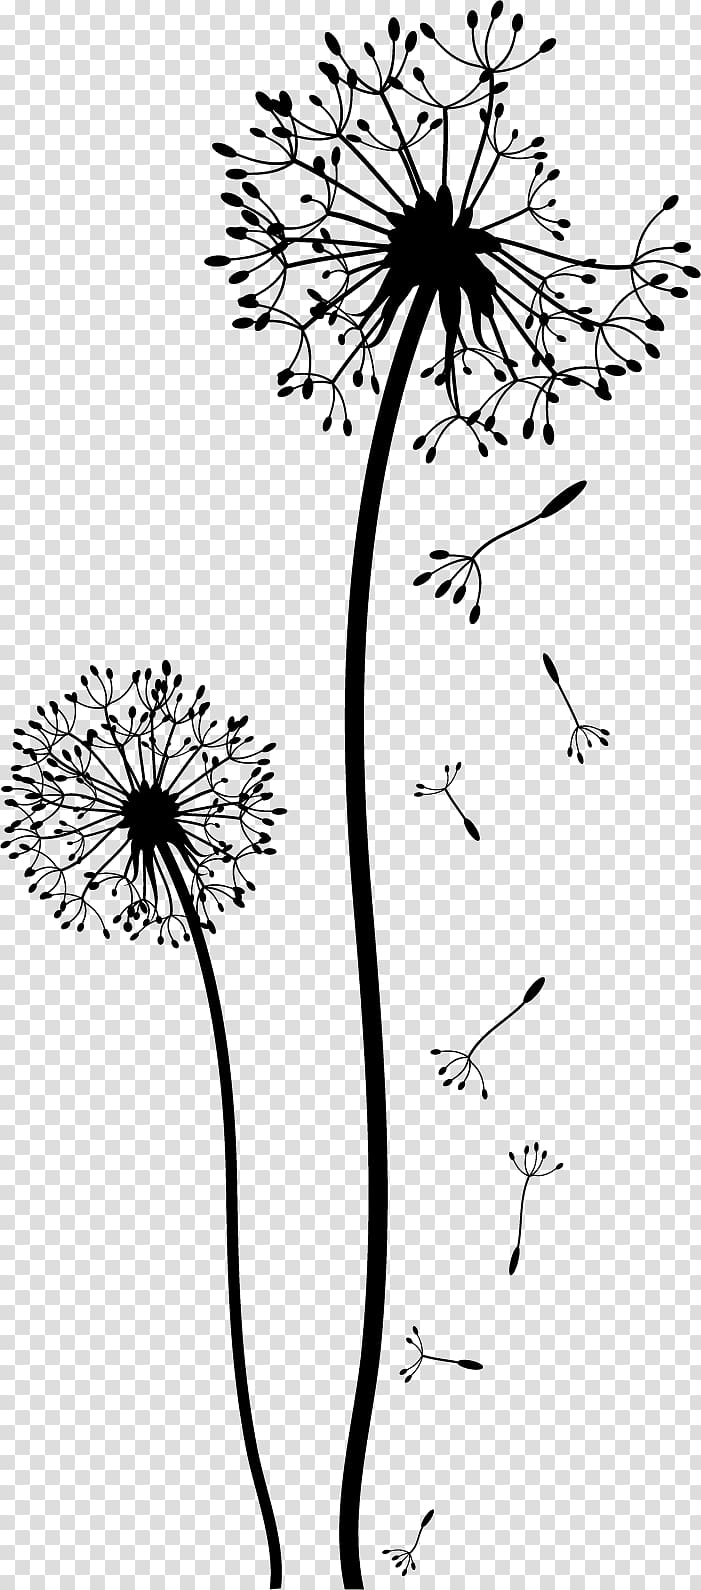 Dandelion Drawing Black And White Flower Wall Transparent Background Png Clipart Dandelion Drawing Dandelion Painting Flower Illustration